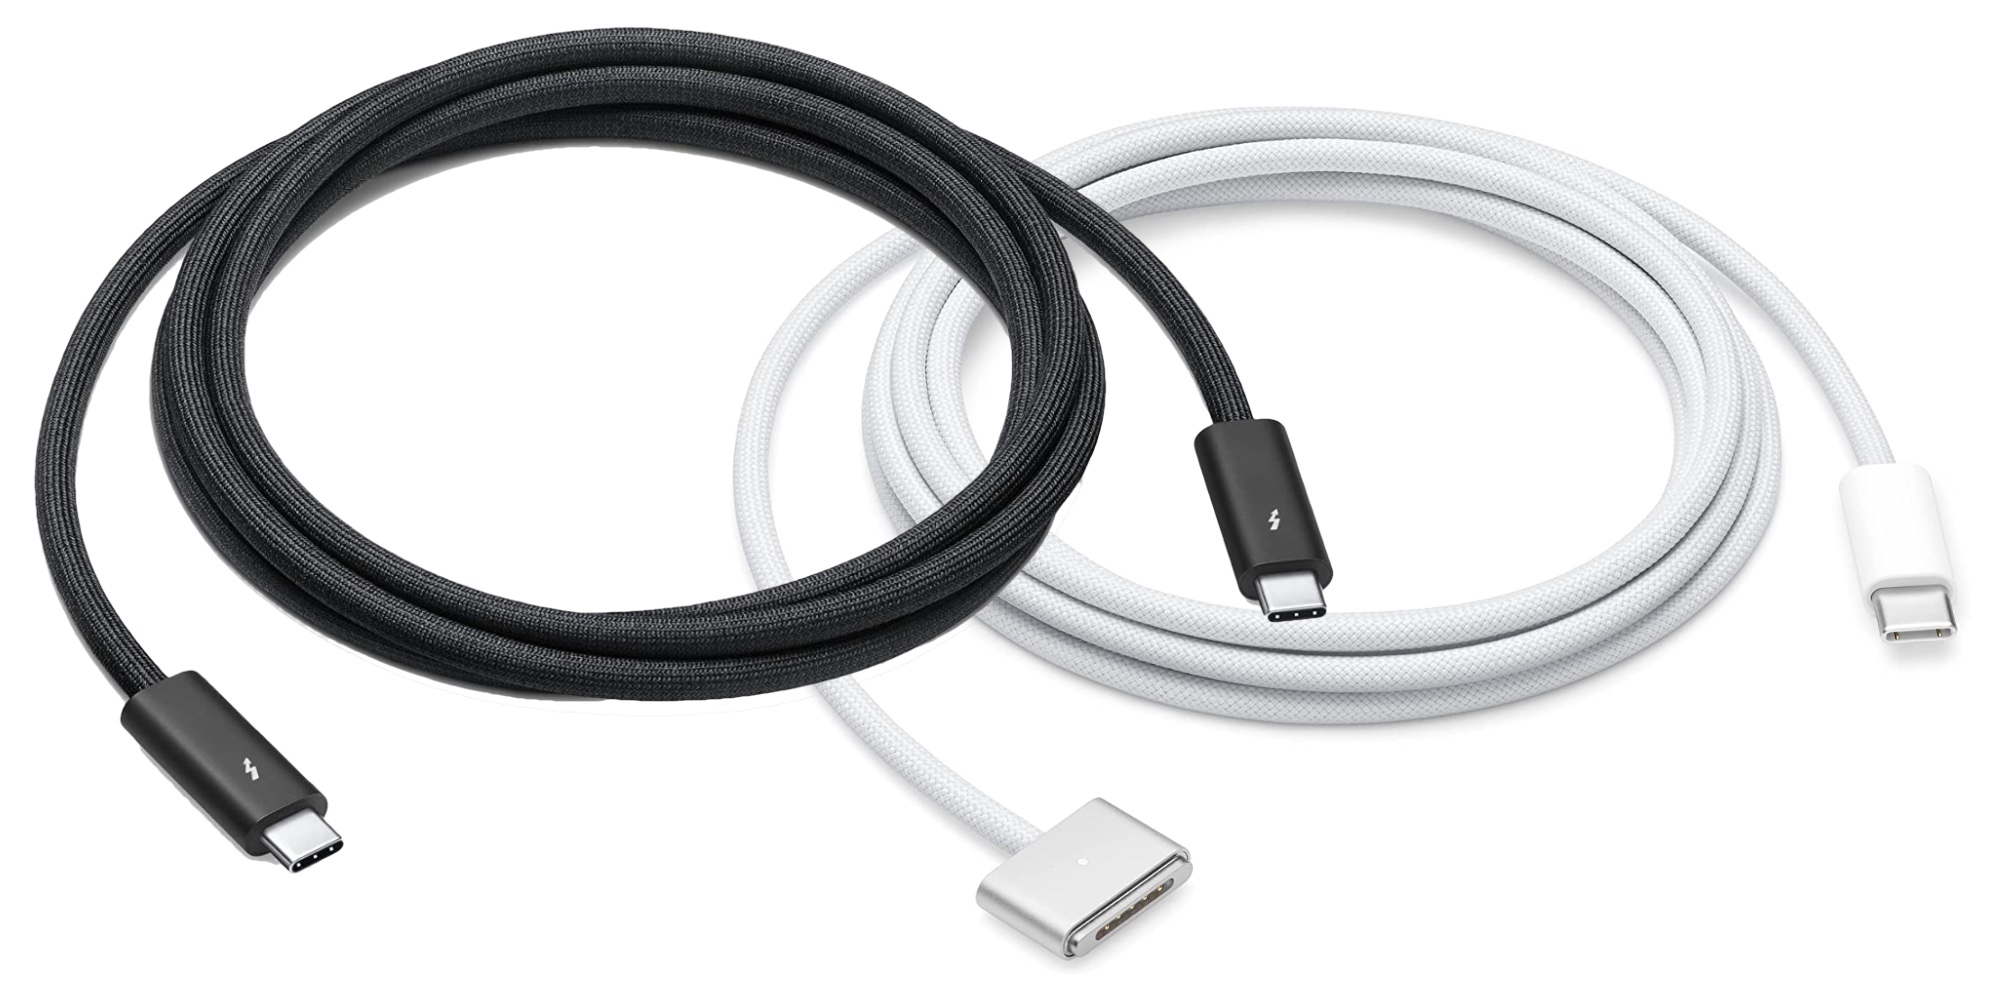 Apple now sells a $129 Thunderbolt 3 Pro cable - The Verge